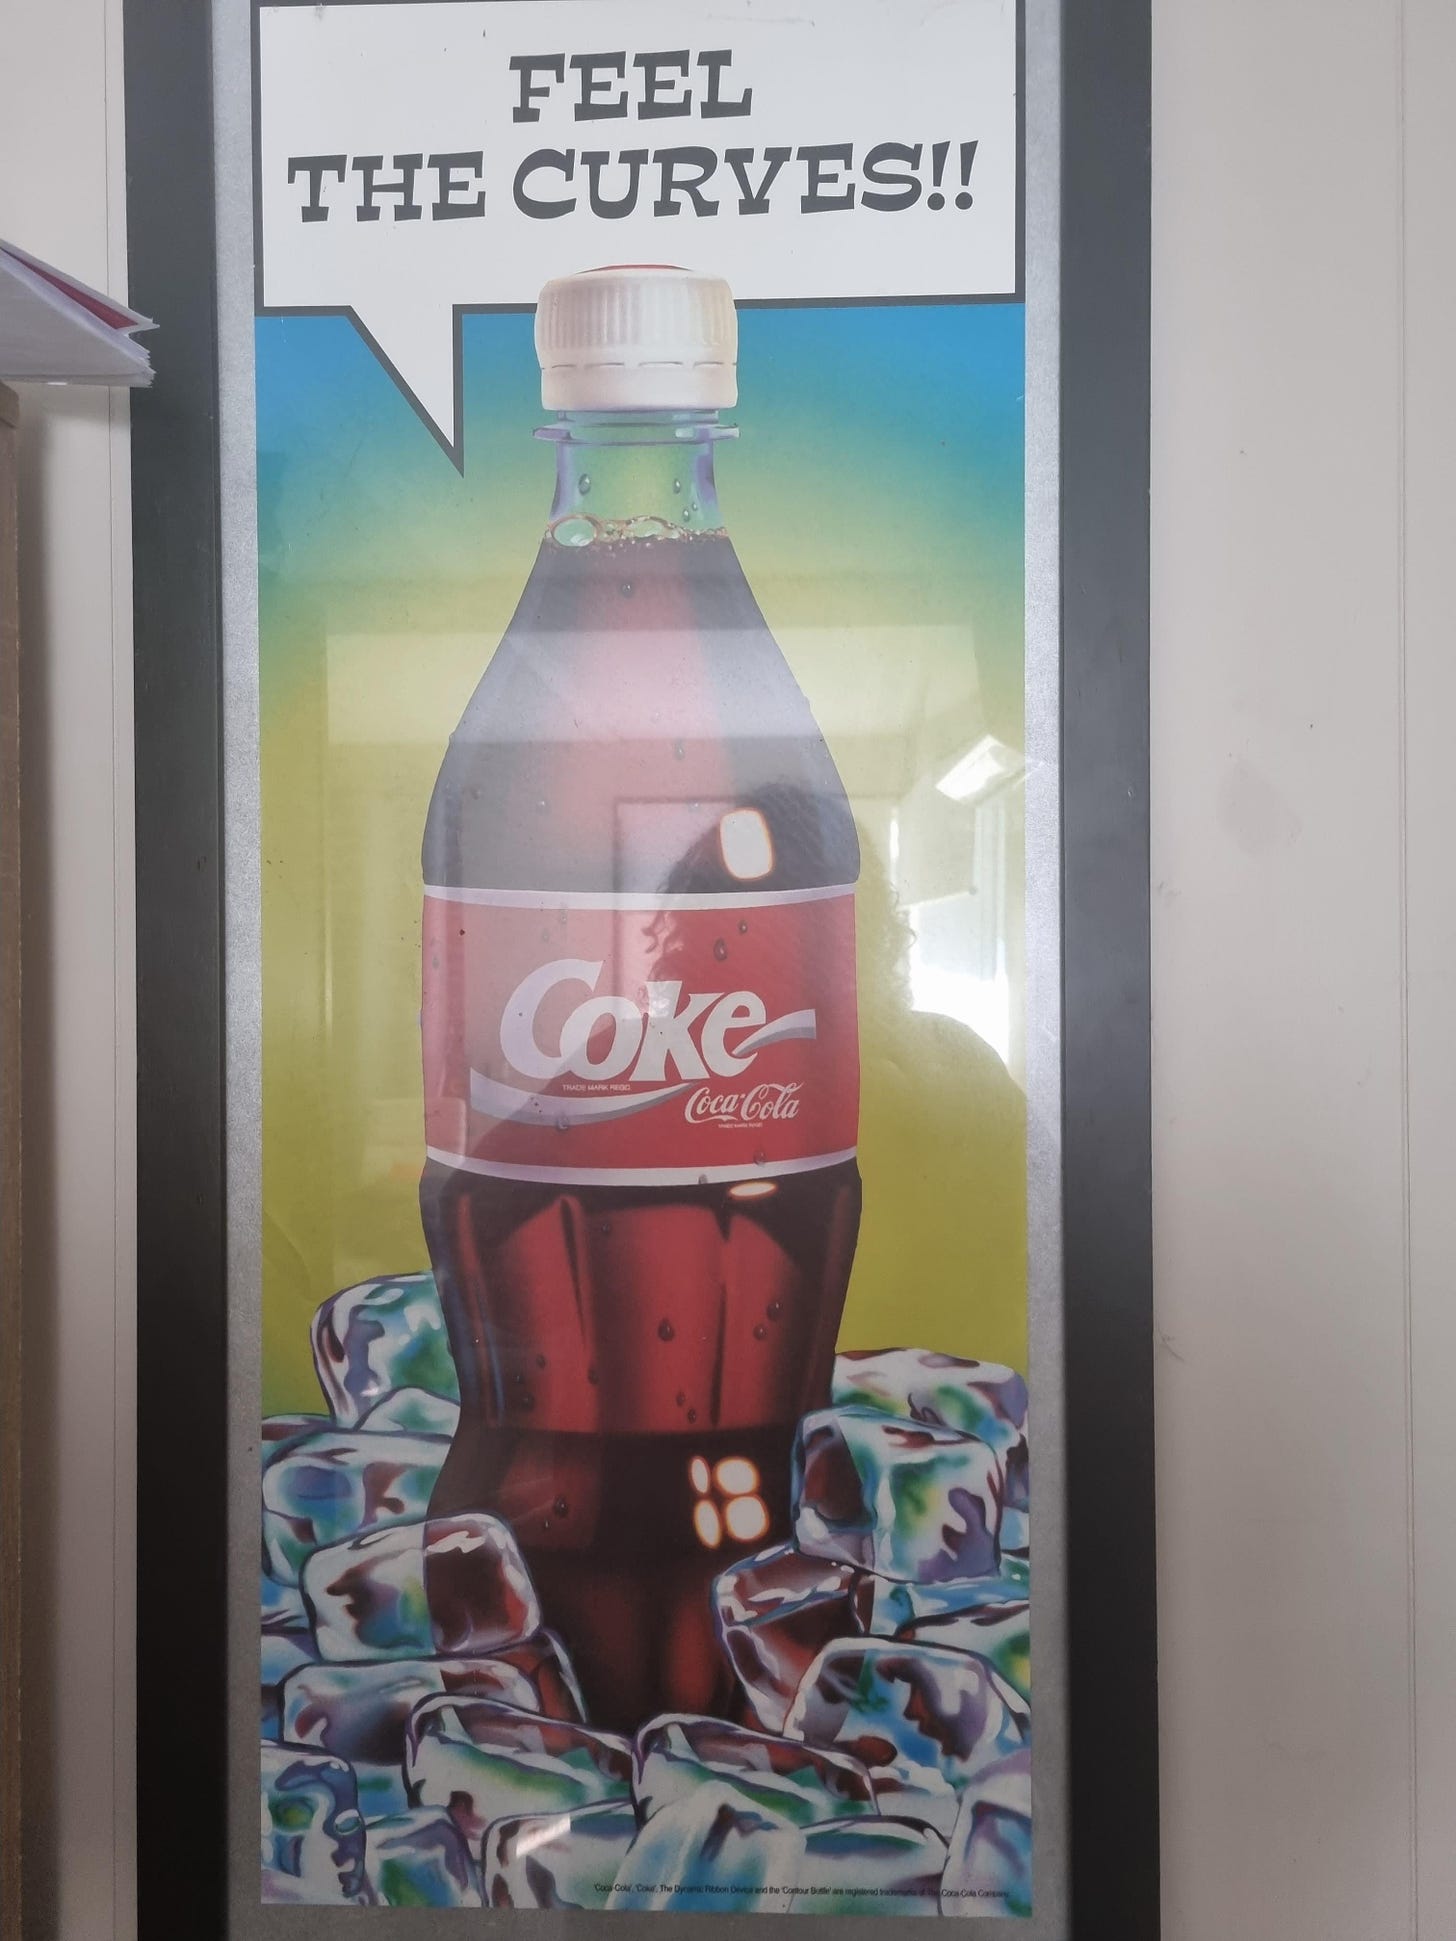 Funny Rude 1980s coca cola poster, went unnoticed for 10 years before  recalled, only when they blew it up onto a truck did they receive the  complaint. : r/HolUp